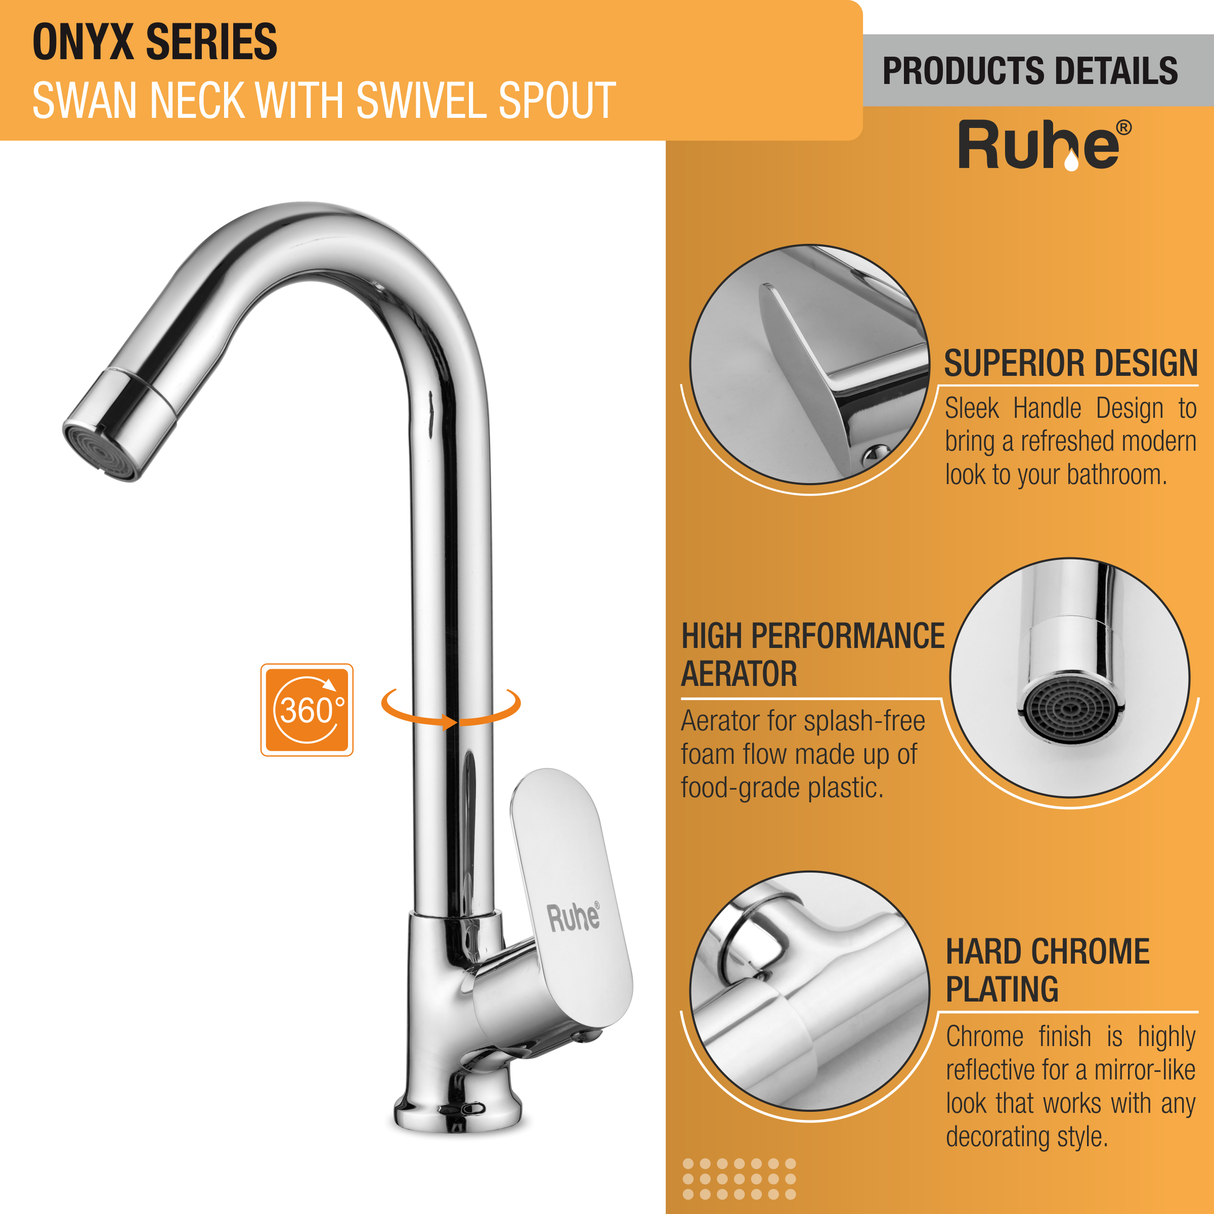 Onyx Swan Neck with Swivel Spout Faucet product details